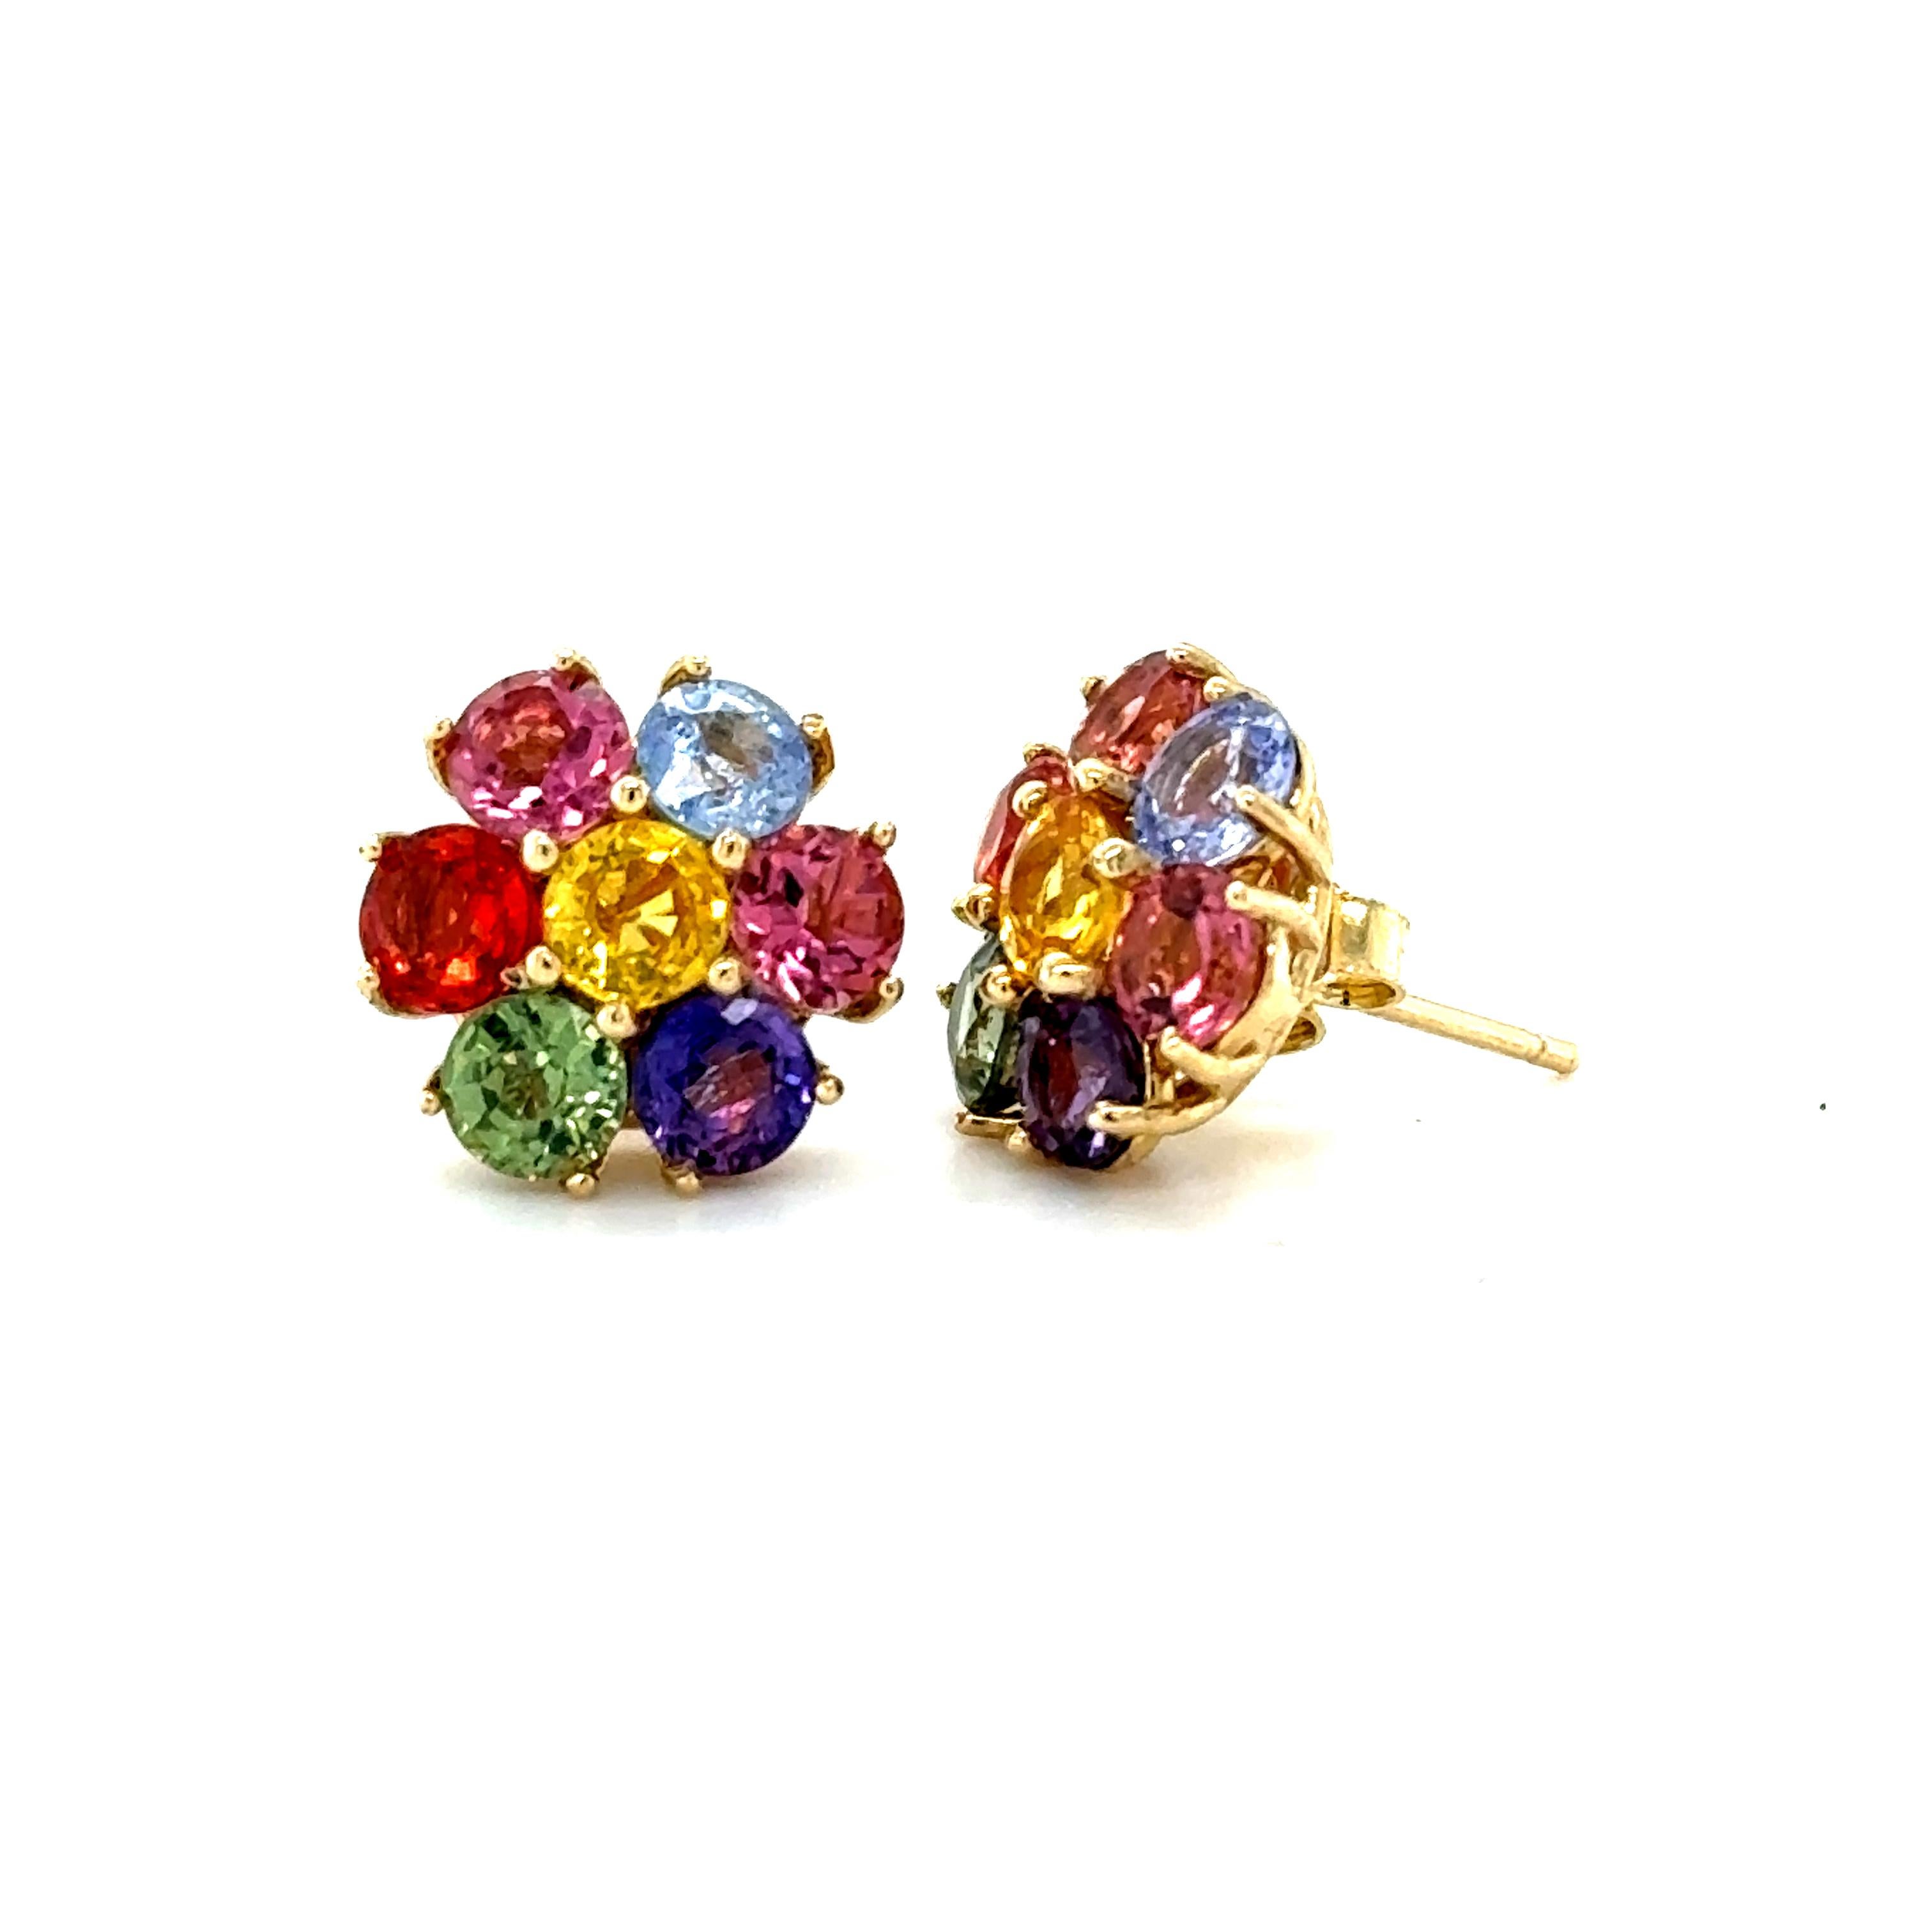 Cute, dainty earrings that are versatile and great for an everyday look! 
4.74 Carat Natural Multi Color Sapphire Yellow Gold Stud Earrings

There are 14 Multi-Colored Sapphires (3.68 carats) and Pink Tourmalines (1.06 carats) set to create a Flower